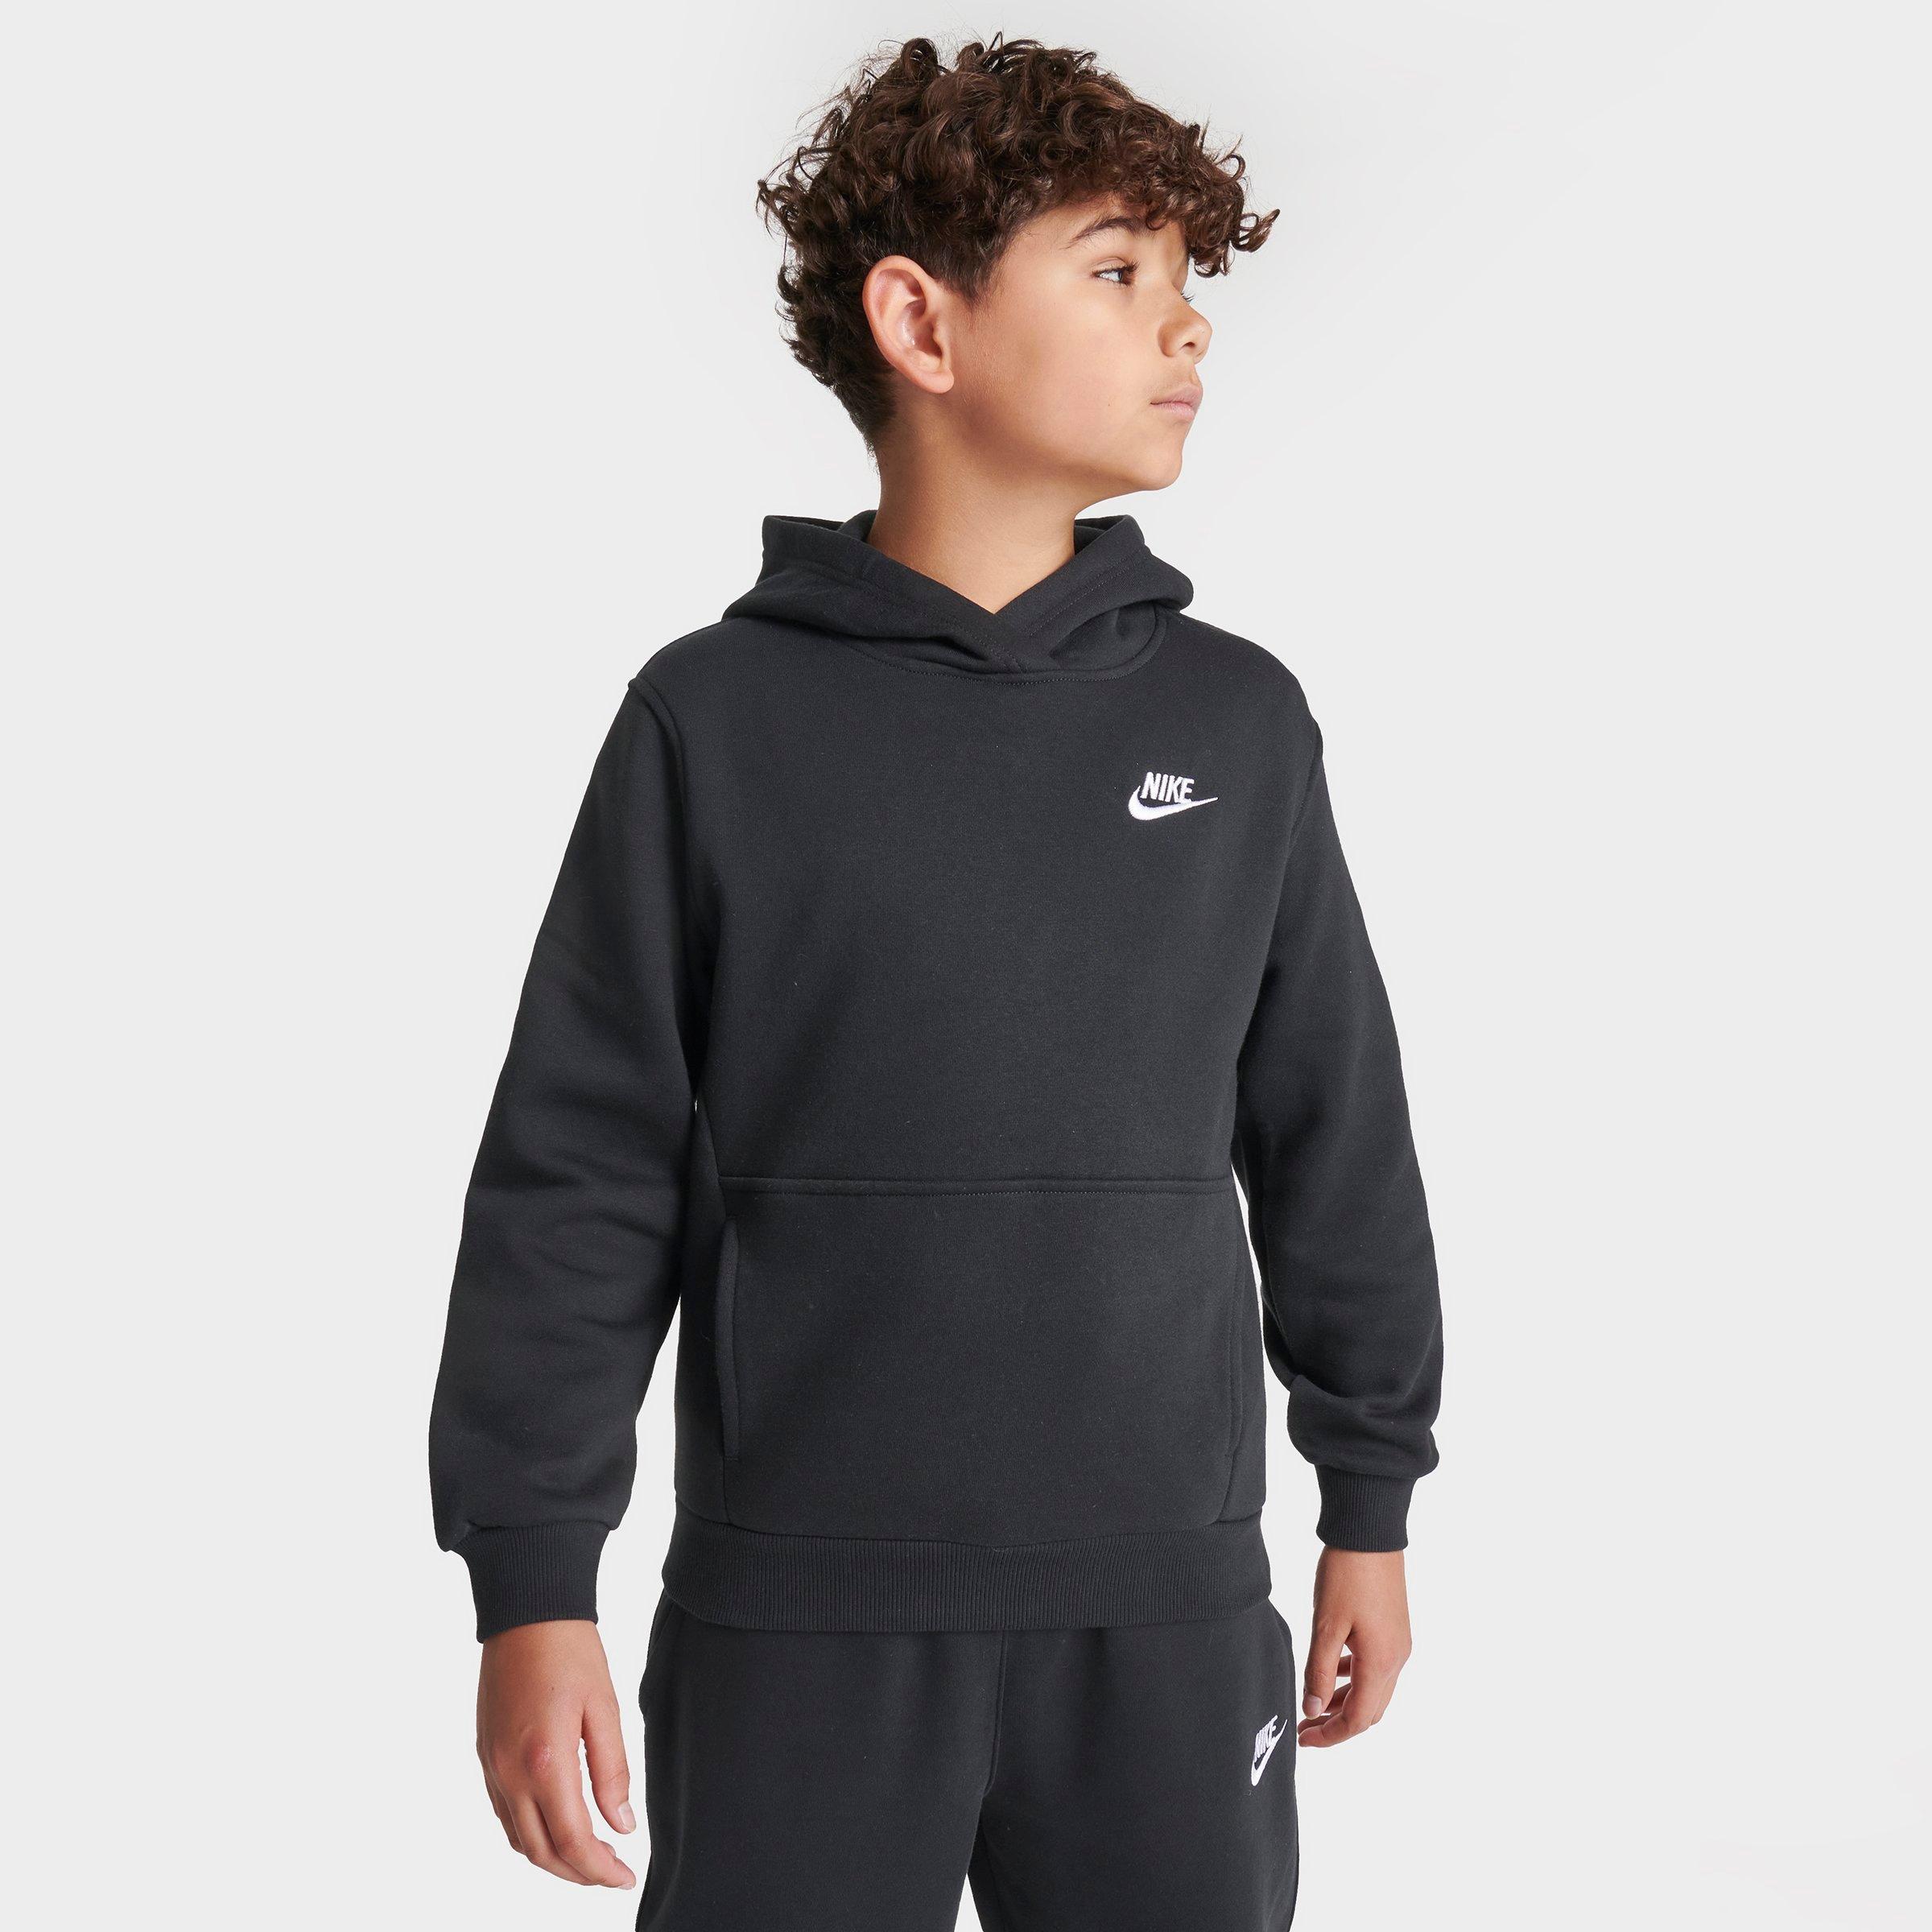 JD Sports Canada, Shoes, Clothing & Accessories